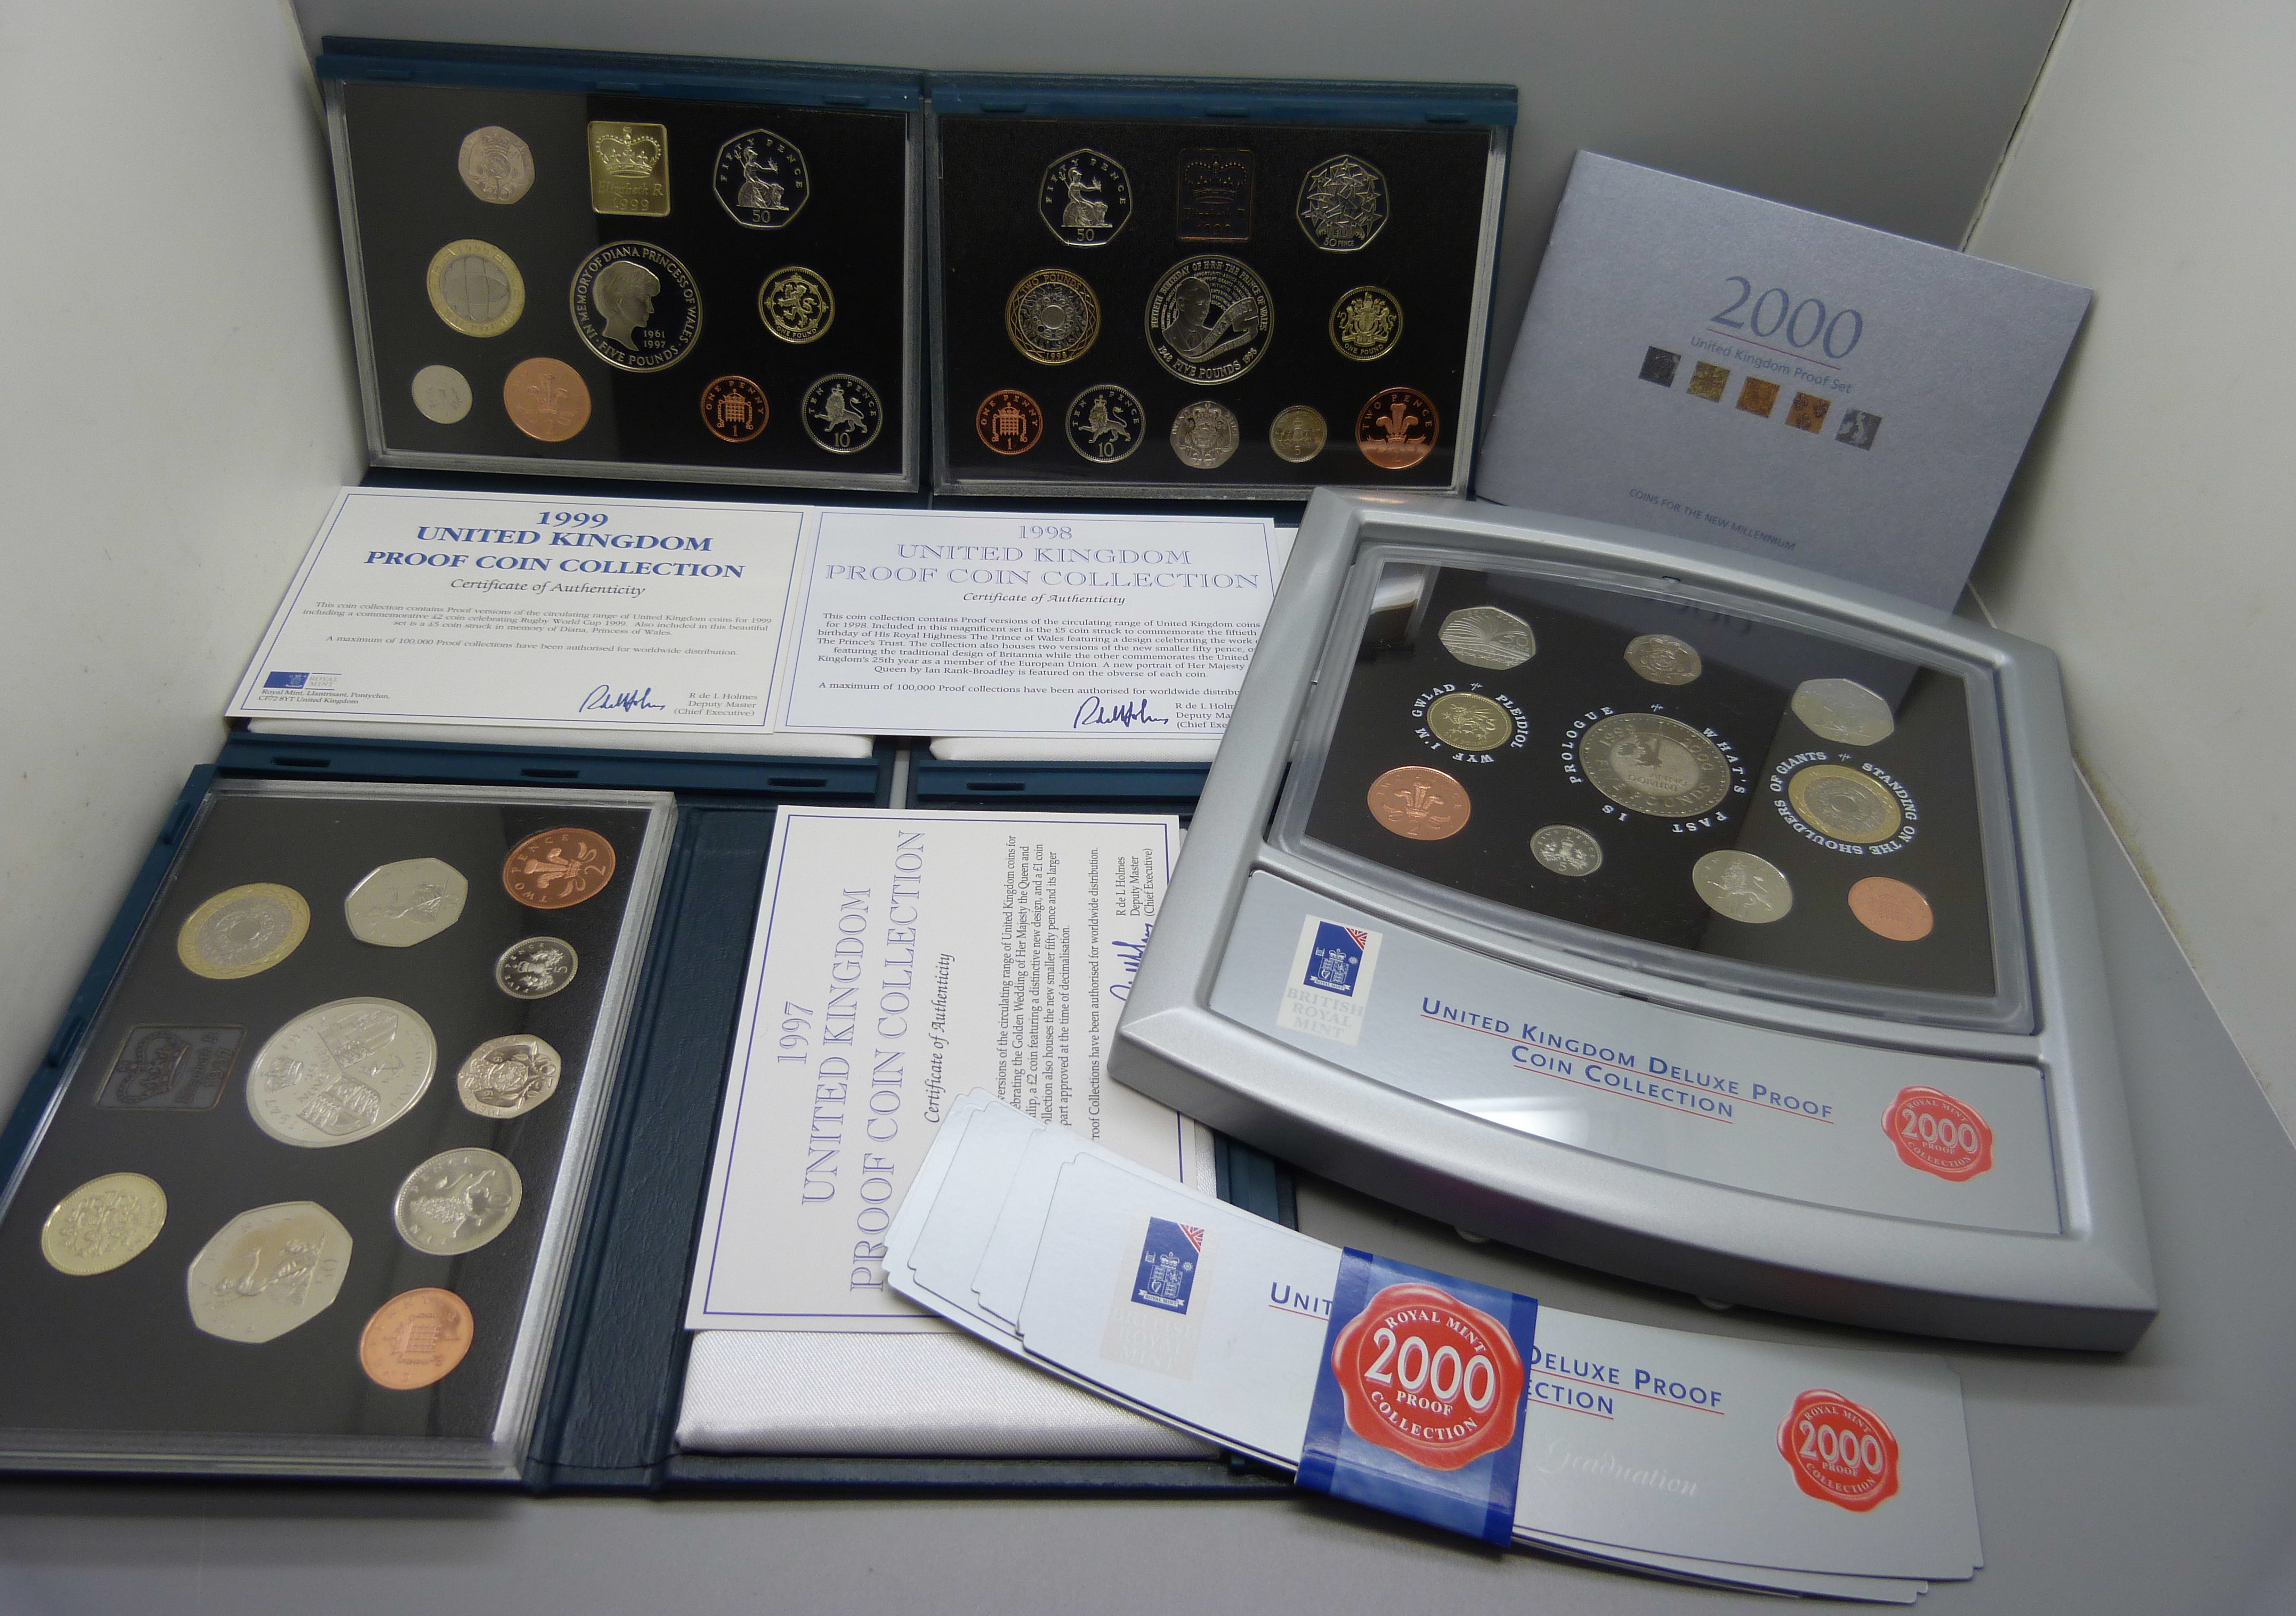 Four UK proof coin sets, 1997, 1998, 1999 and 2000